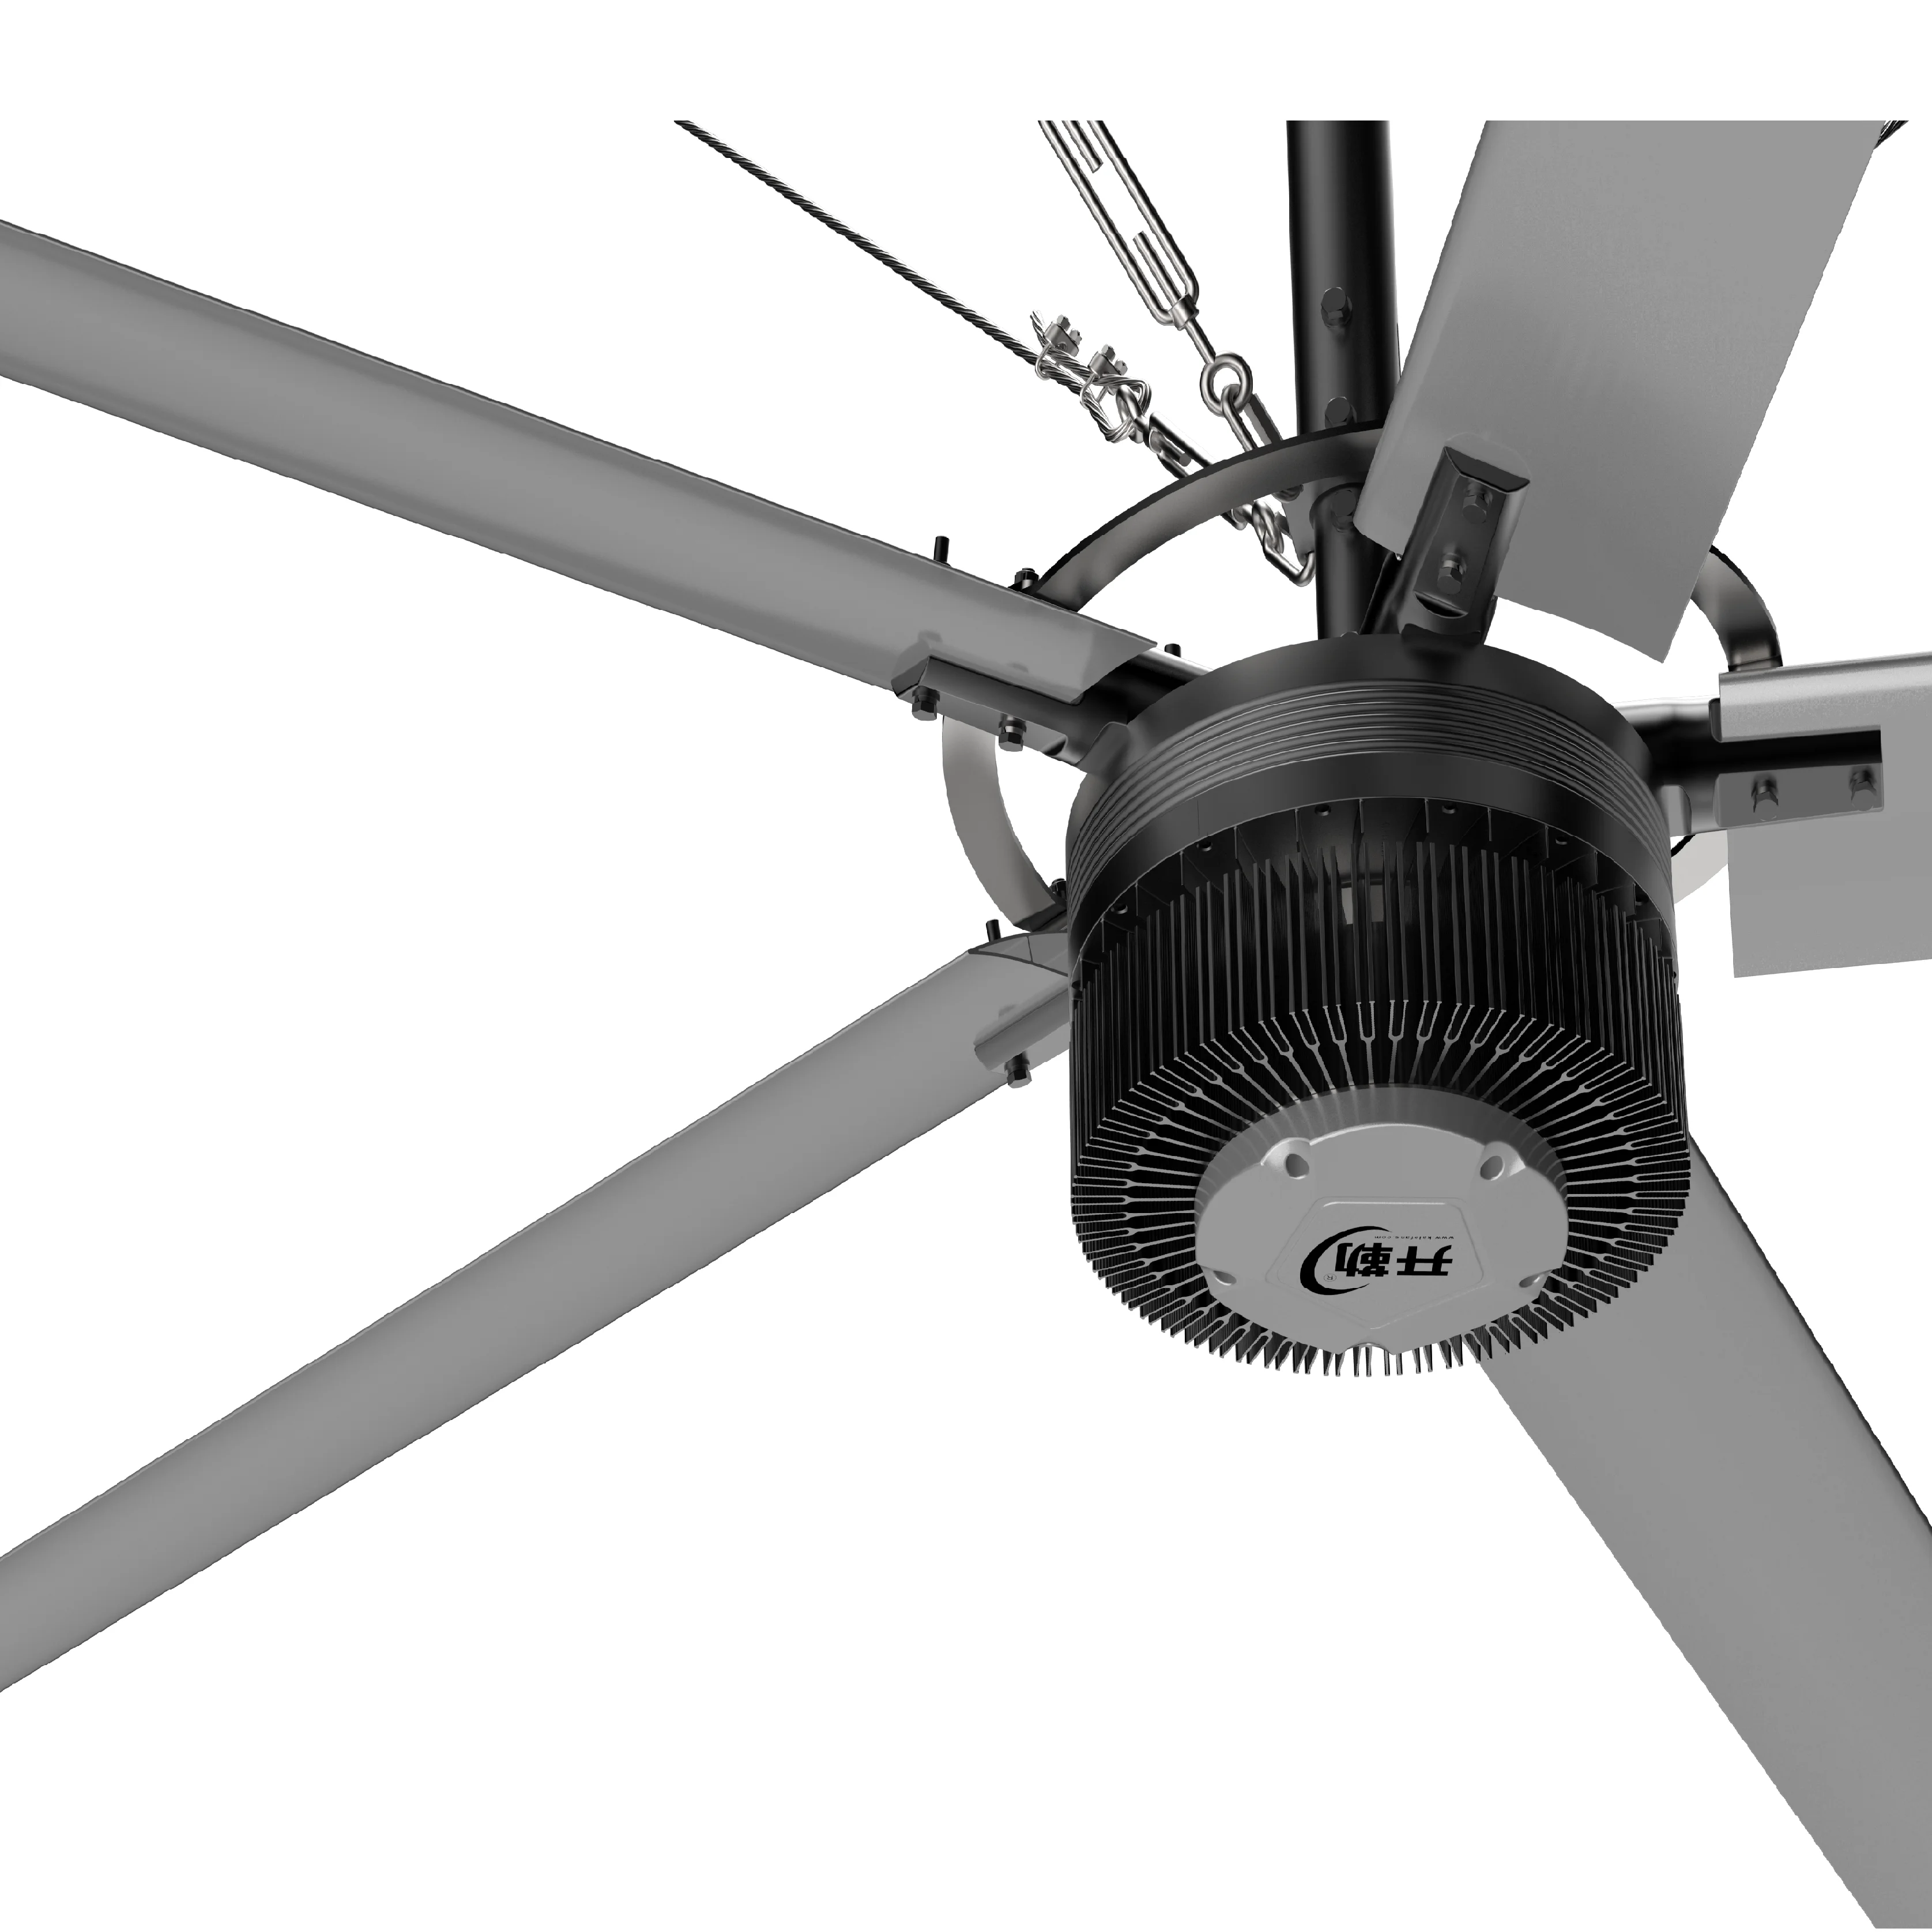 24ft 20ft Big Size Low Power Industrial Hvls Giant Ceiling Fans Buy Hvls Giant Ceiling Fans